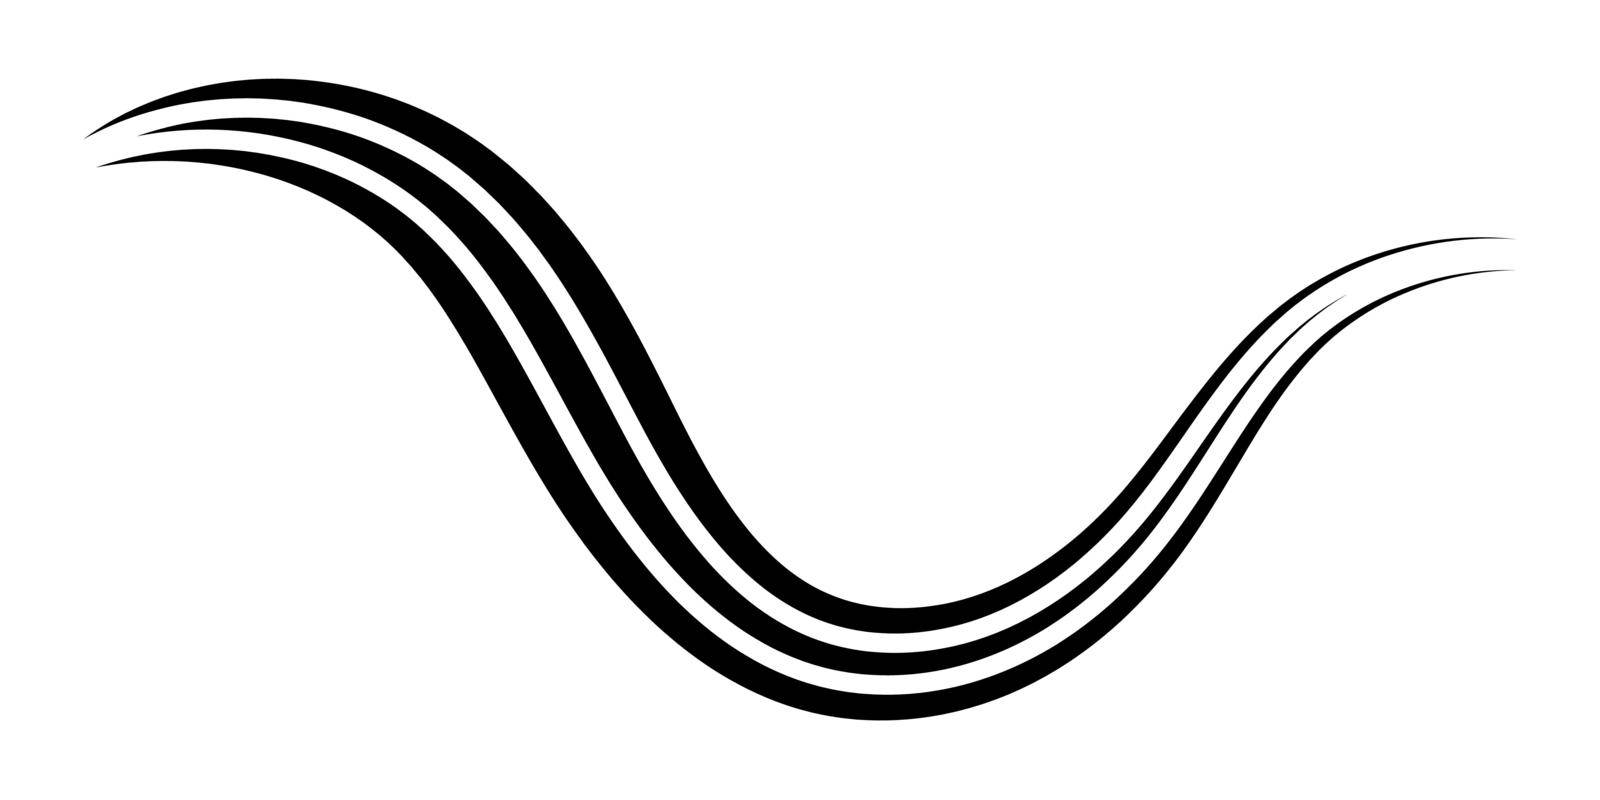 Curved graceful triple line, vector, ribbon as an elegant calligraphy element gracefully curved line